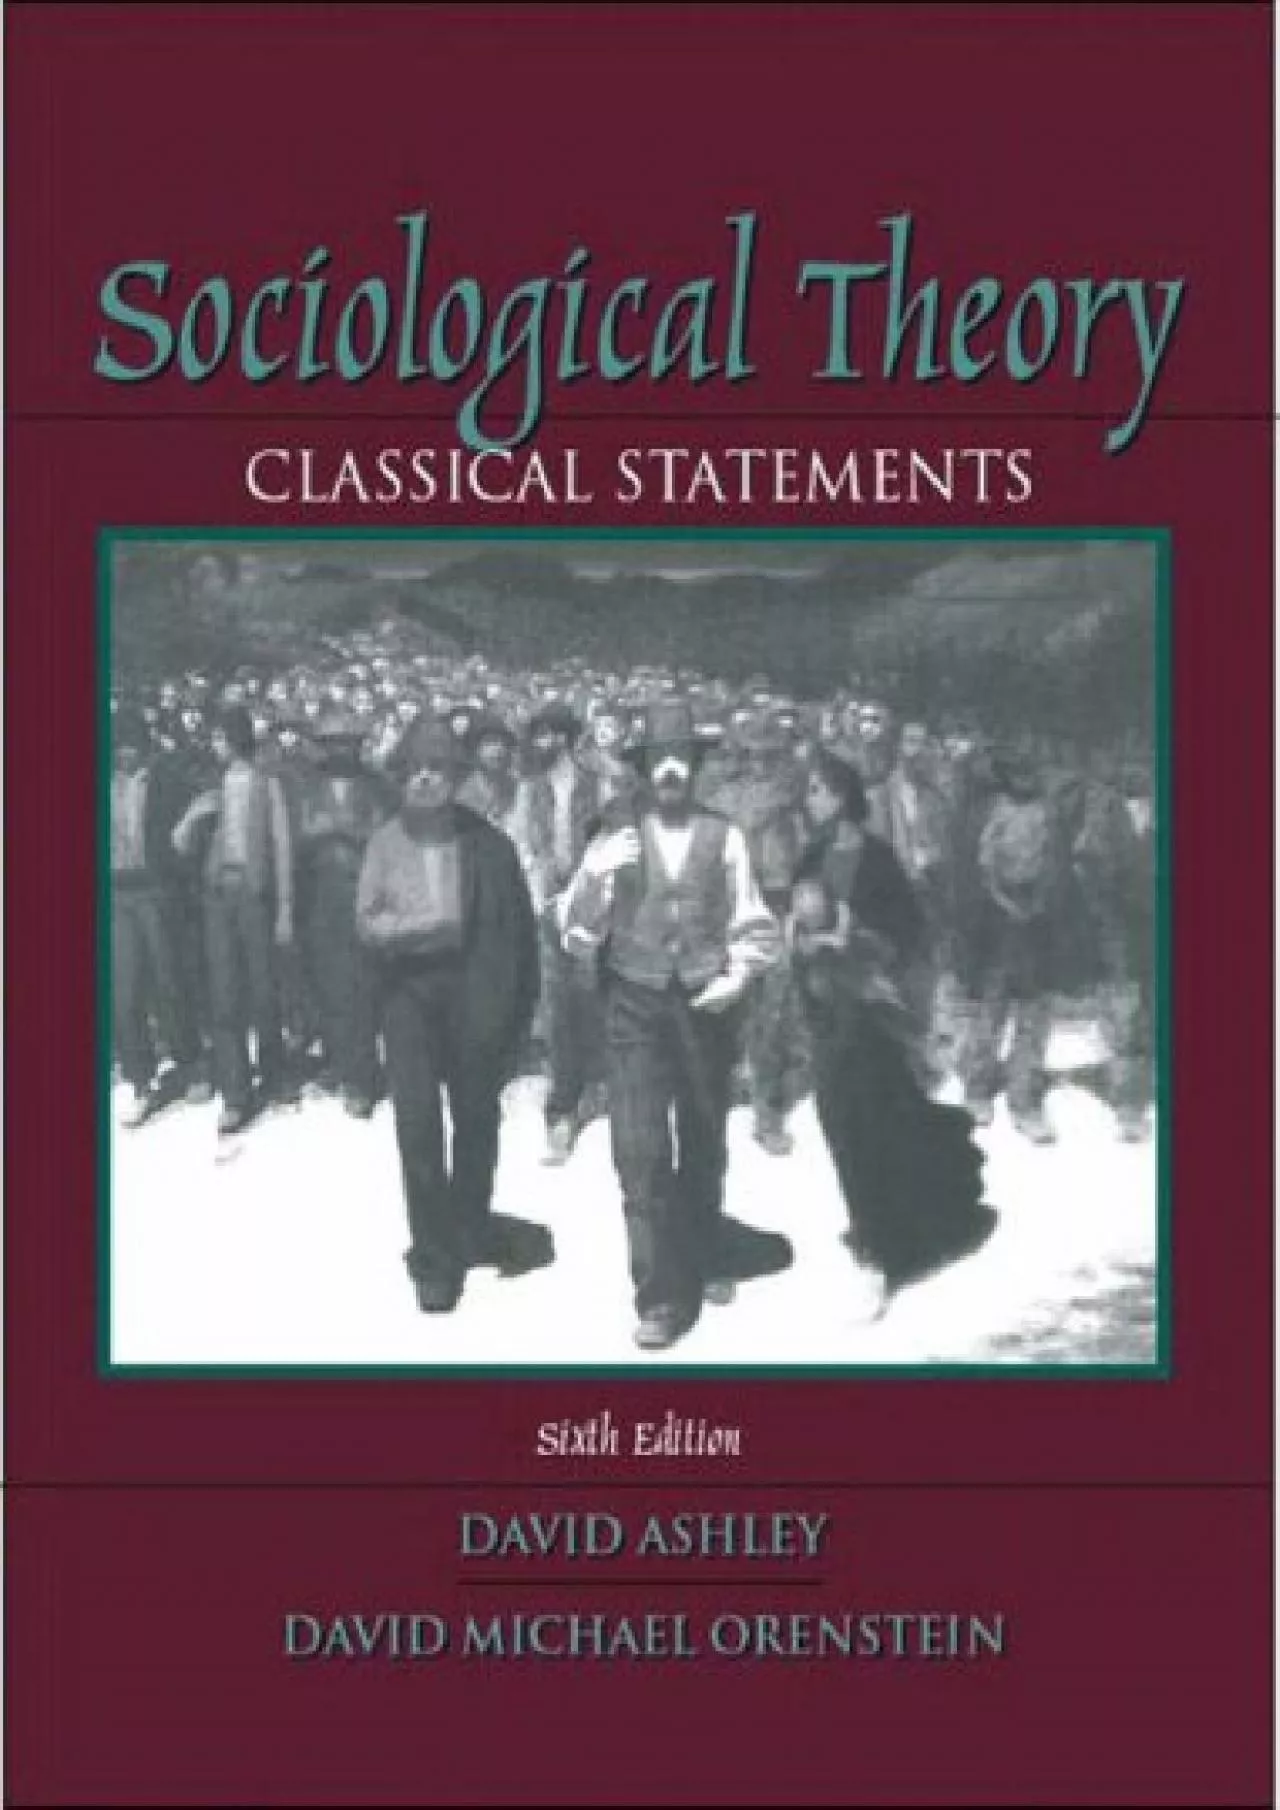 [EBOOK]-Sociological Theory: Classical Statements